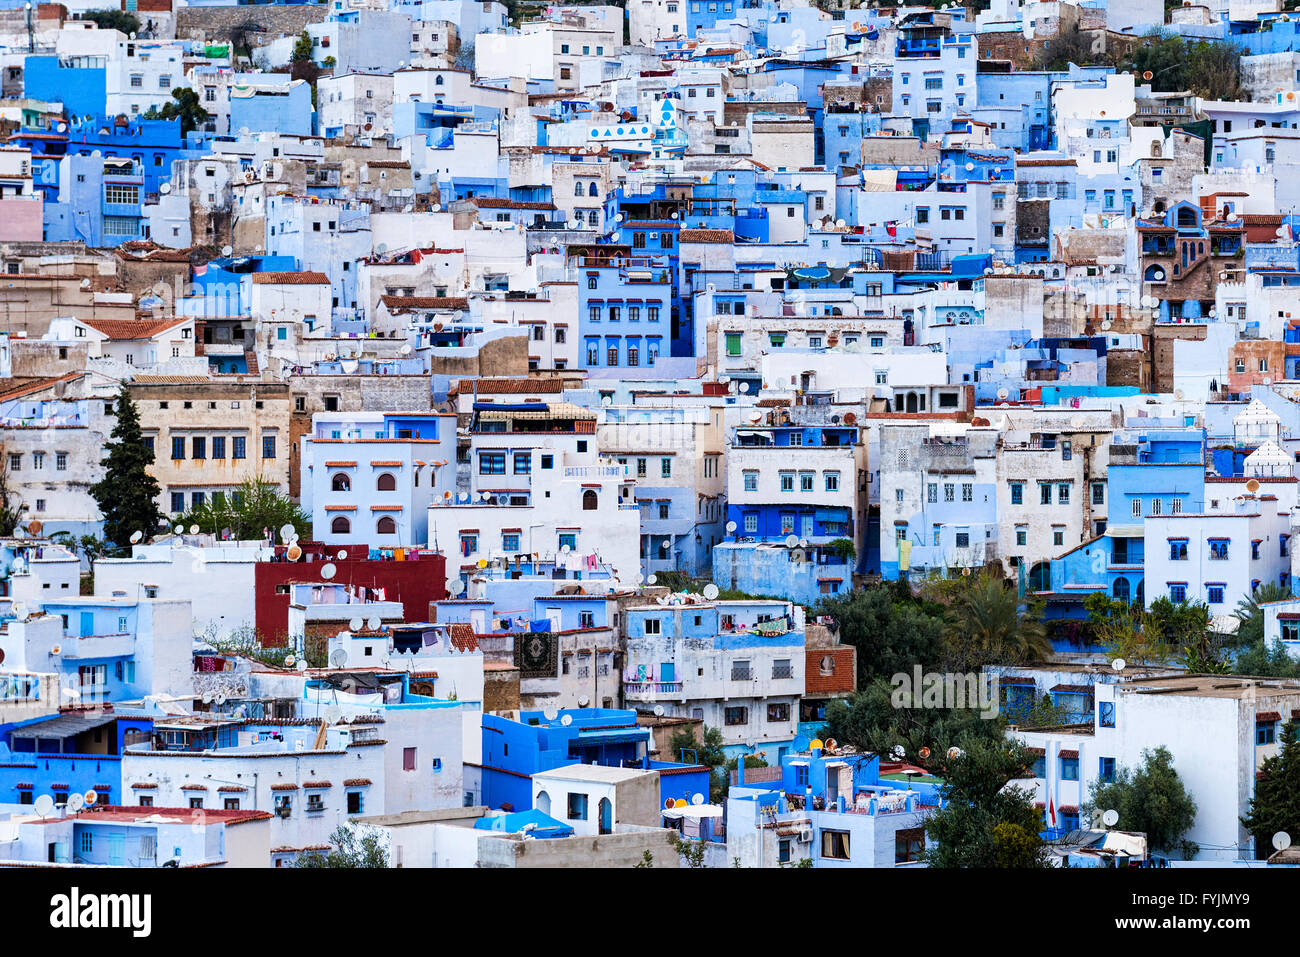 View of the town of Chefchaouen in Morocco Stock Photo